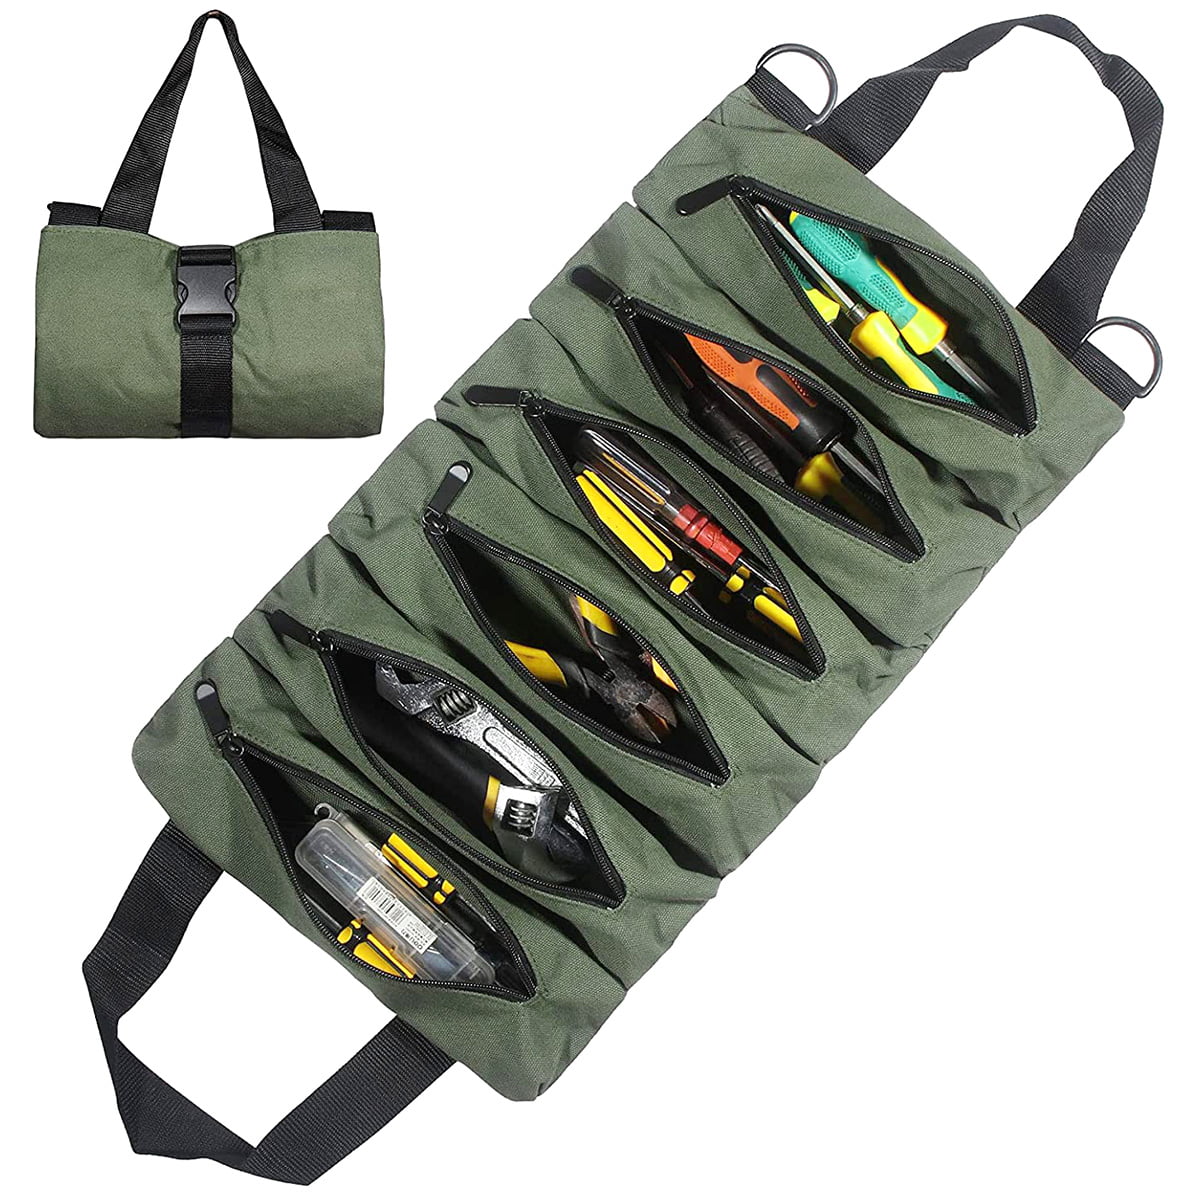 Tool Roll Up Bag Canvas with 6 Zipper Pockets Large Capacity Tools